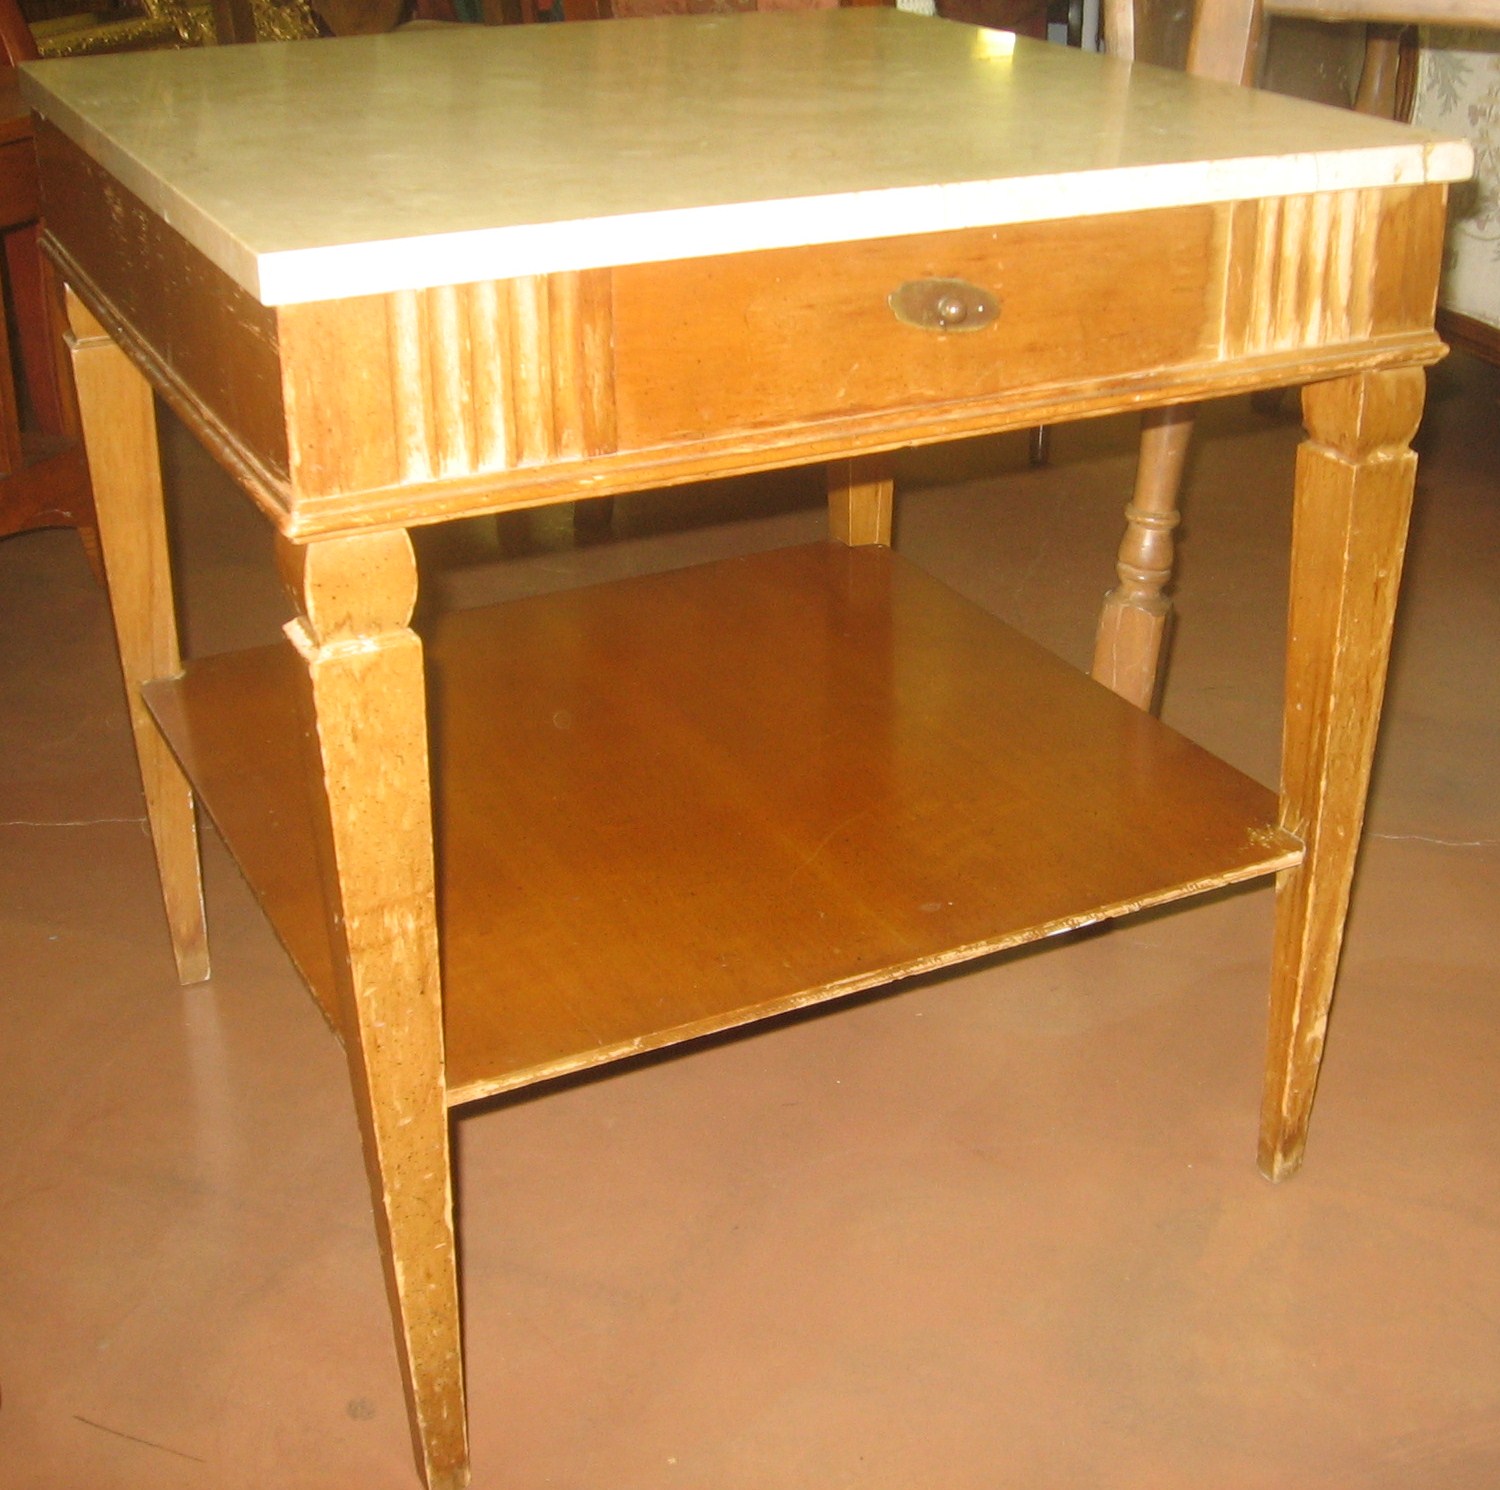 small wooden desk sitting on tiled flooring in a room